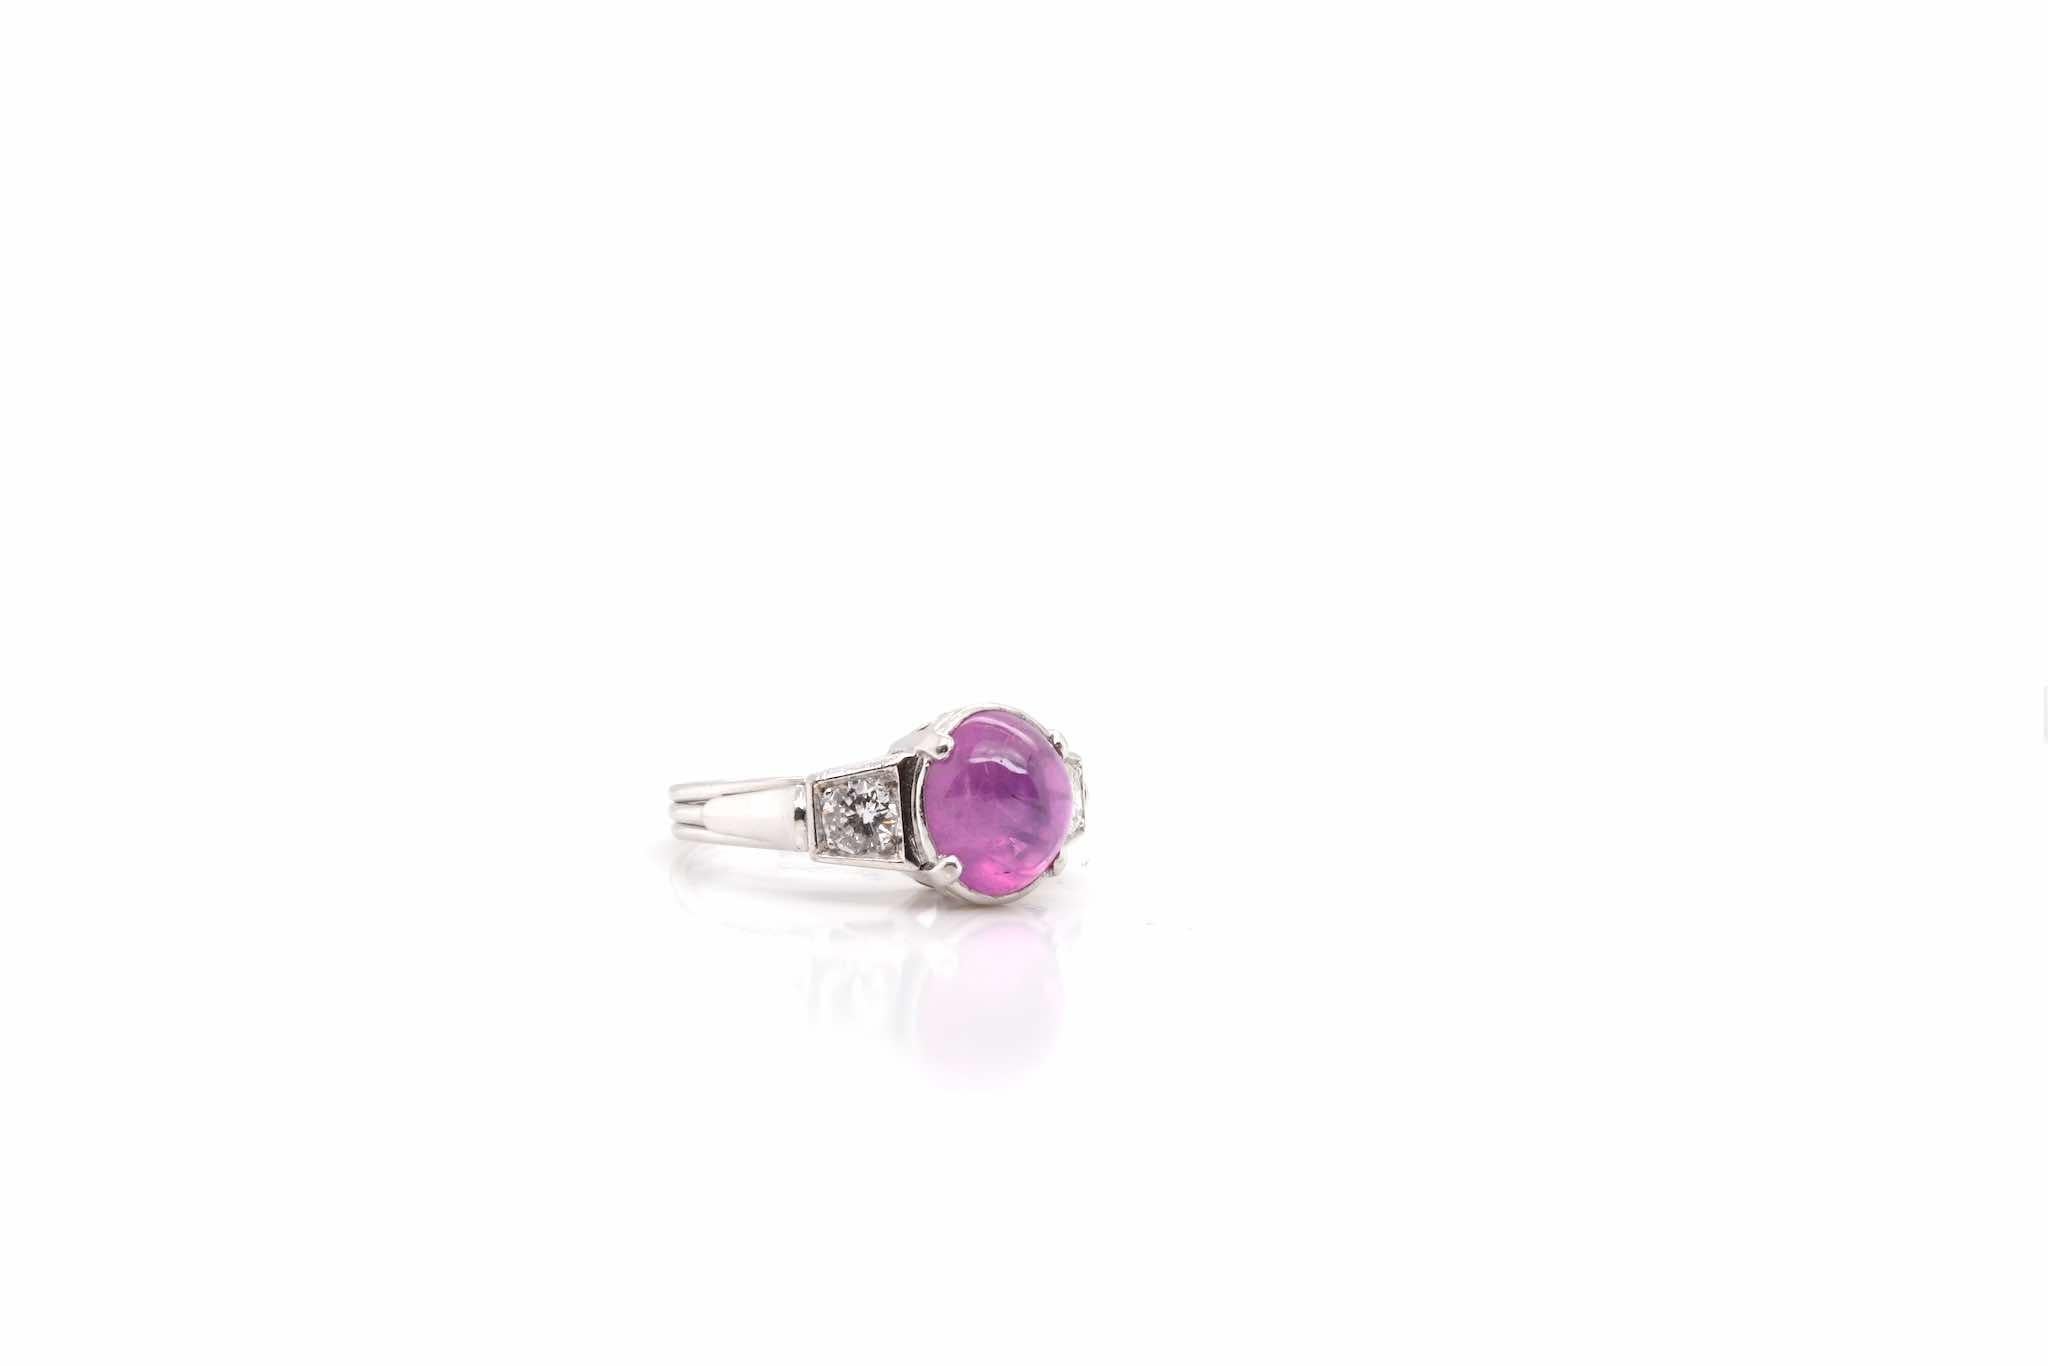 Cabochon Star Ceylon pink sapphire and diamonds ring For Sale